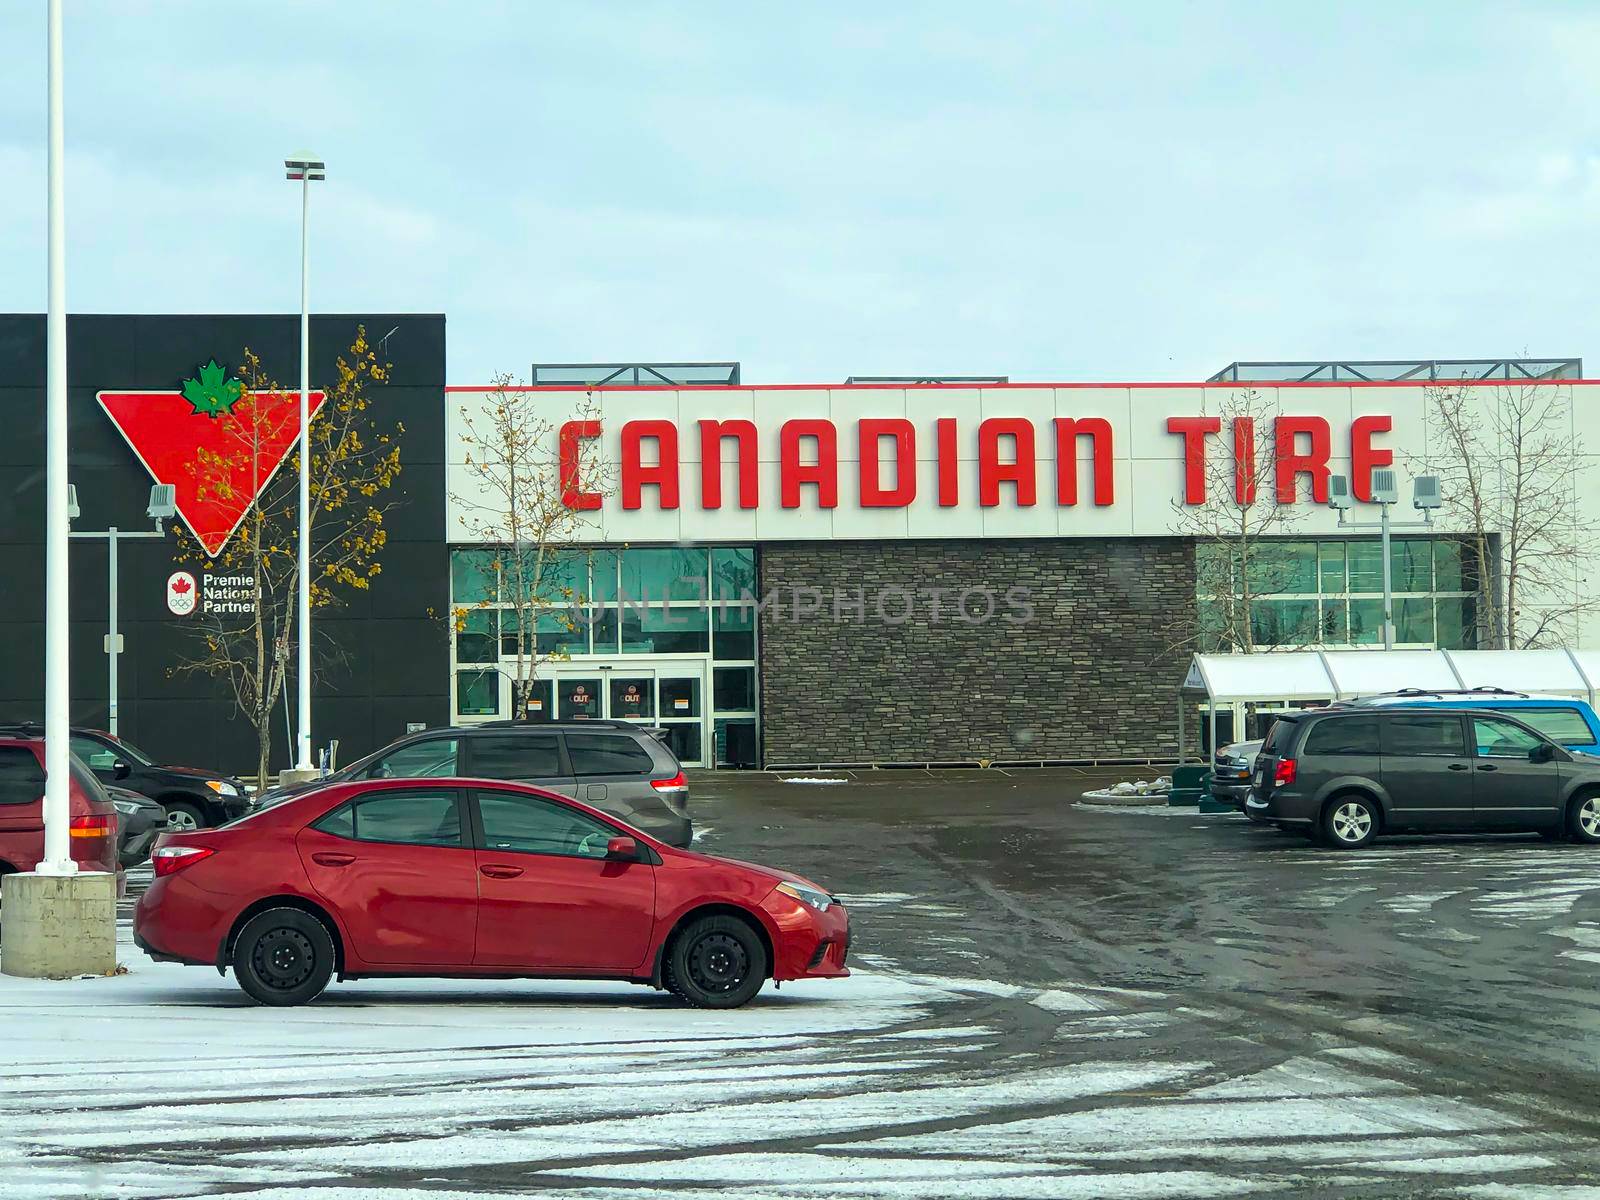 Calgary Alberta, Canada. Oct 17, 2020. Canadian Tire store during winter time.